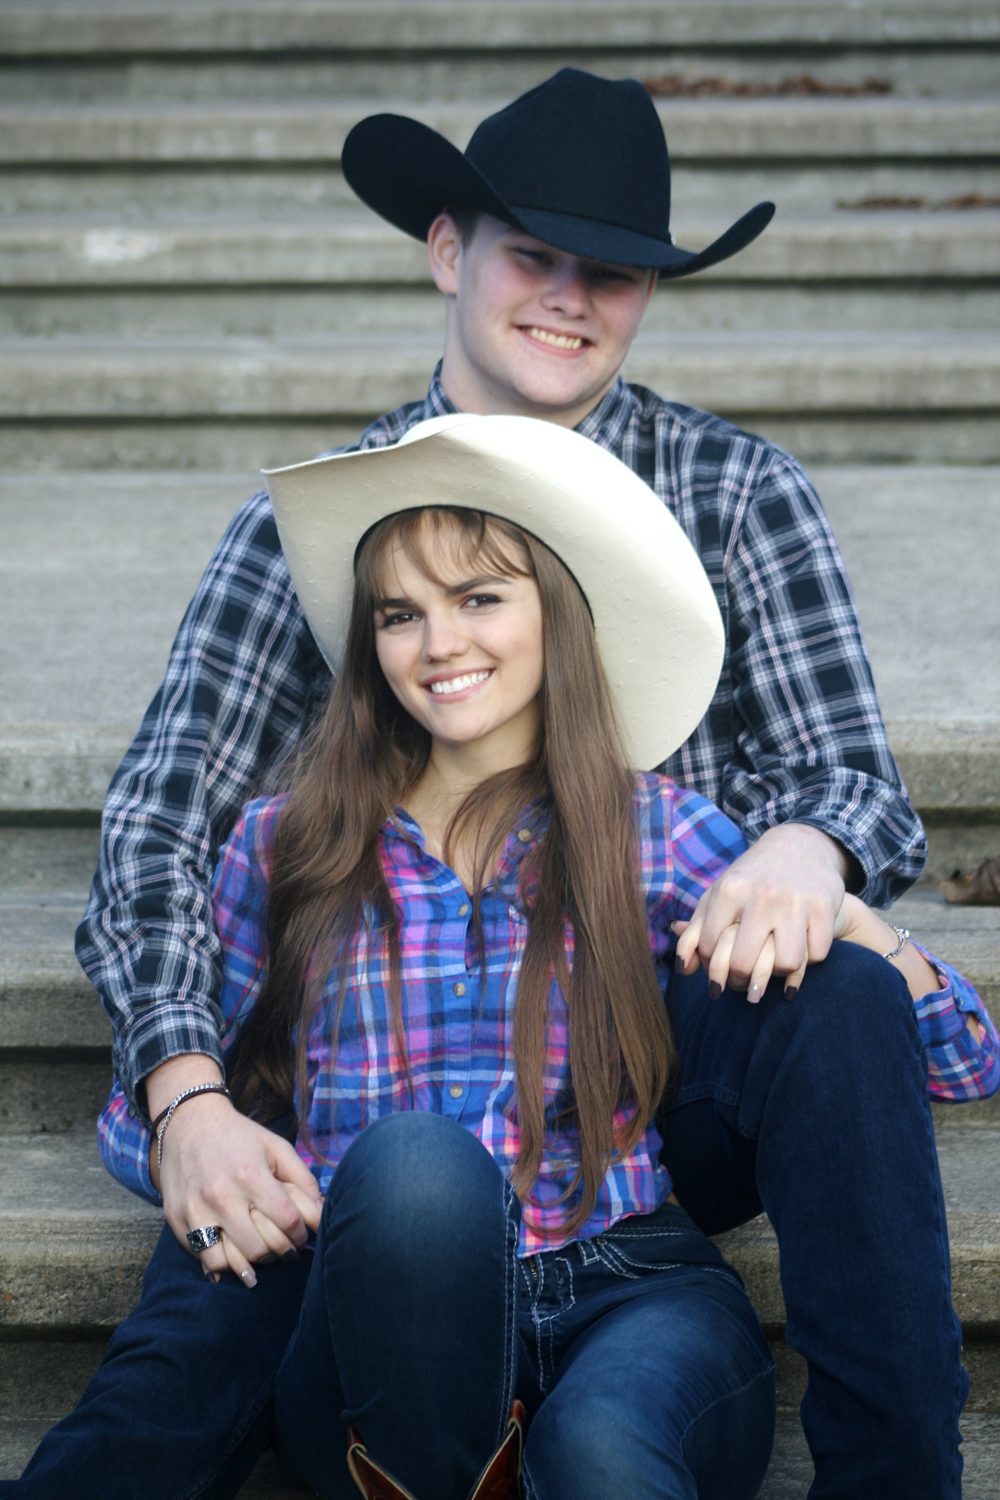 A photograph of a cowboy and cowgirl couple posing with vibrant colors and grey steps in the background.